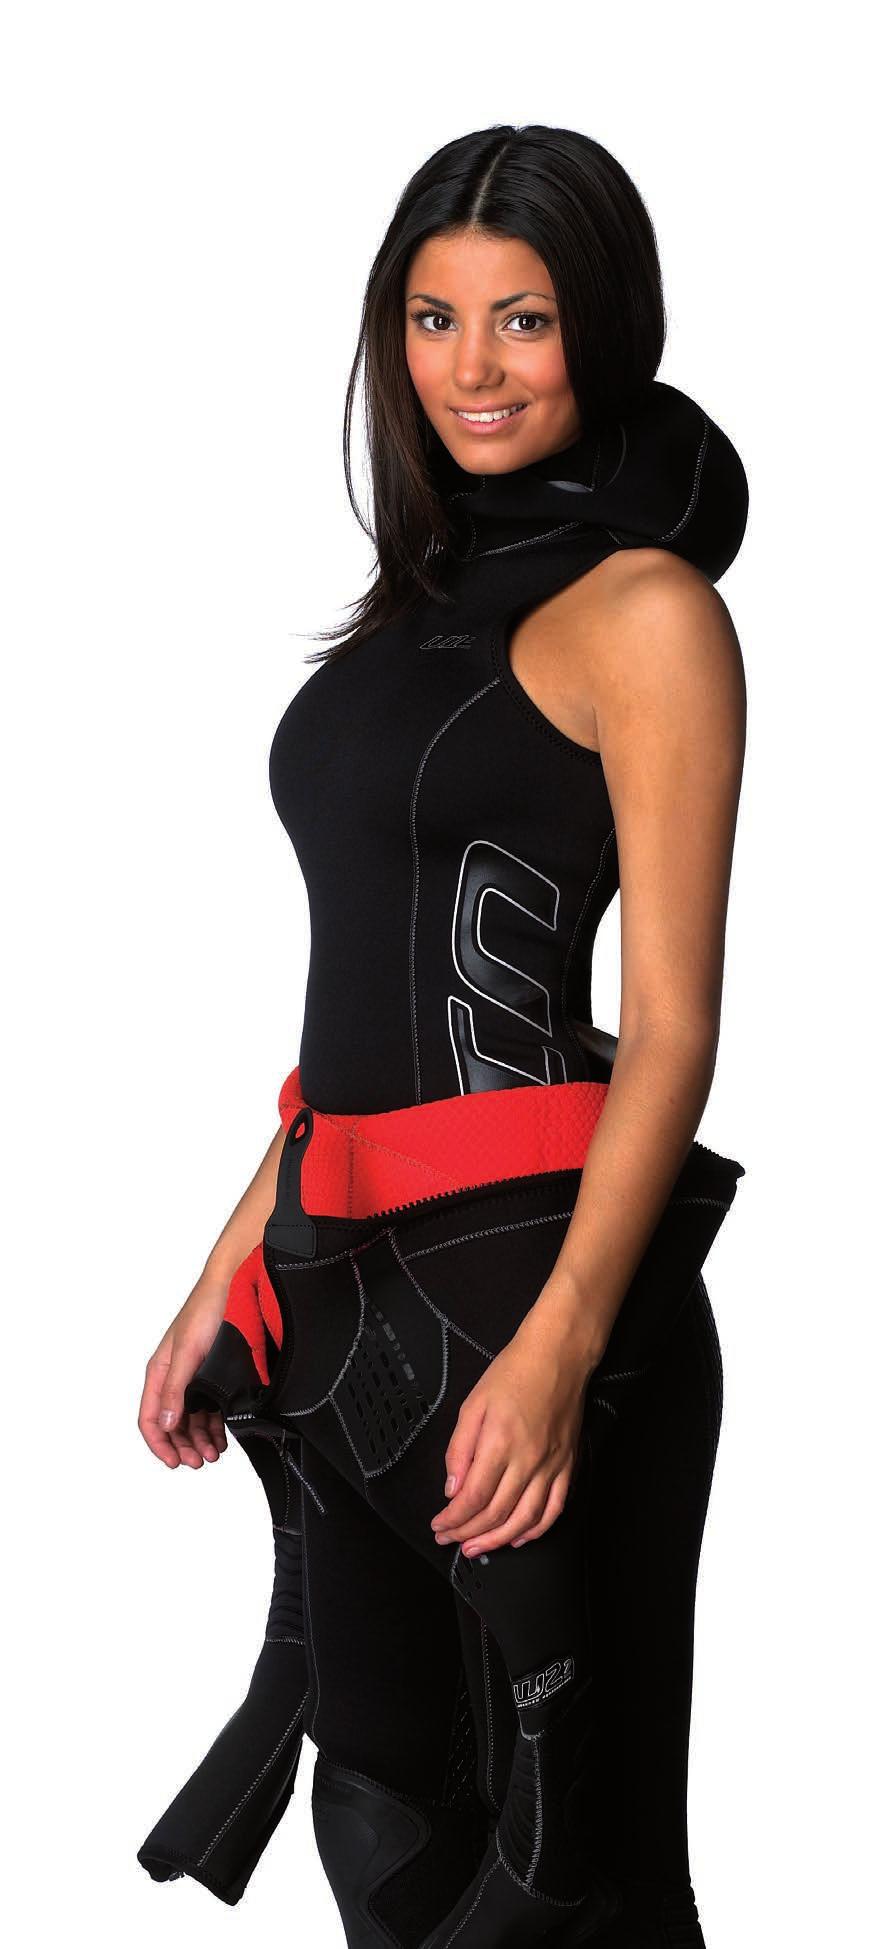 U1UNDERVEST PRODUCT SUMMARY Waterpoof coupled an anatomically sculpted 2 mm under vest to our